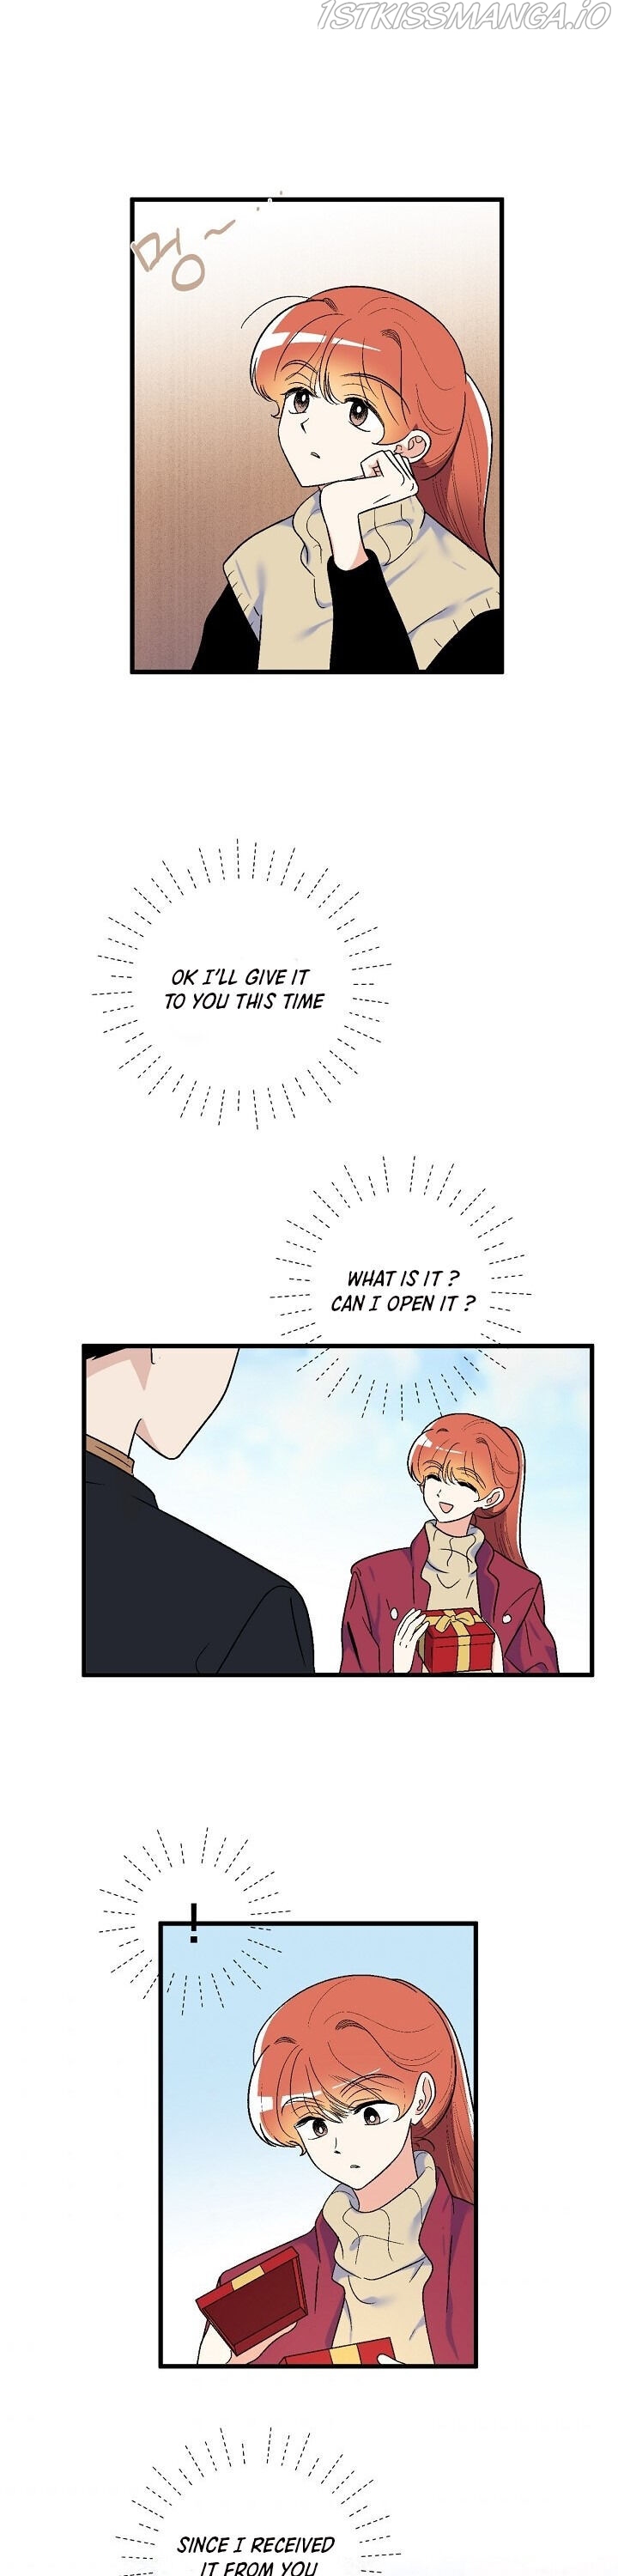 Sentence Of Love - Page 2